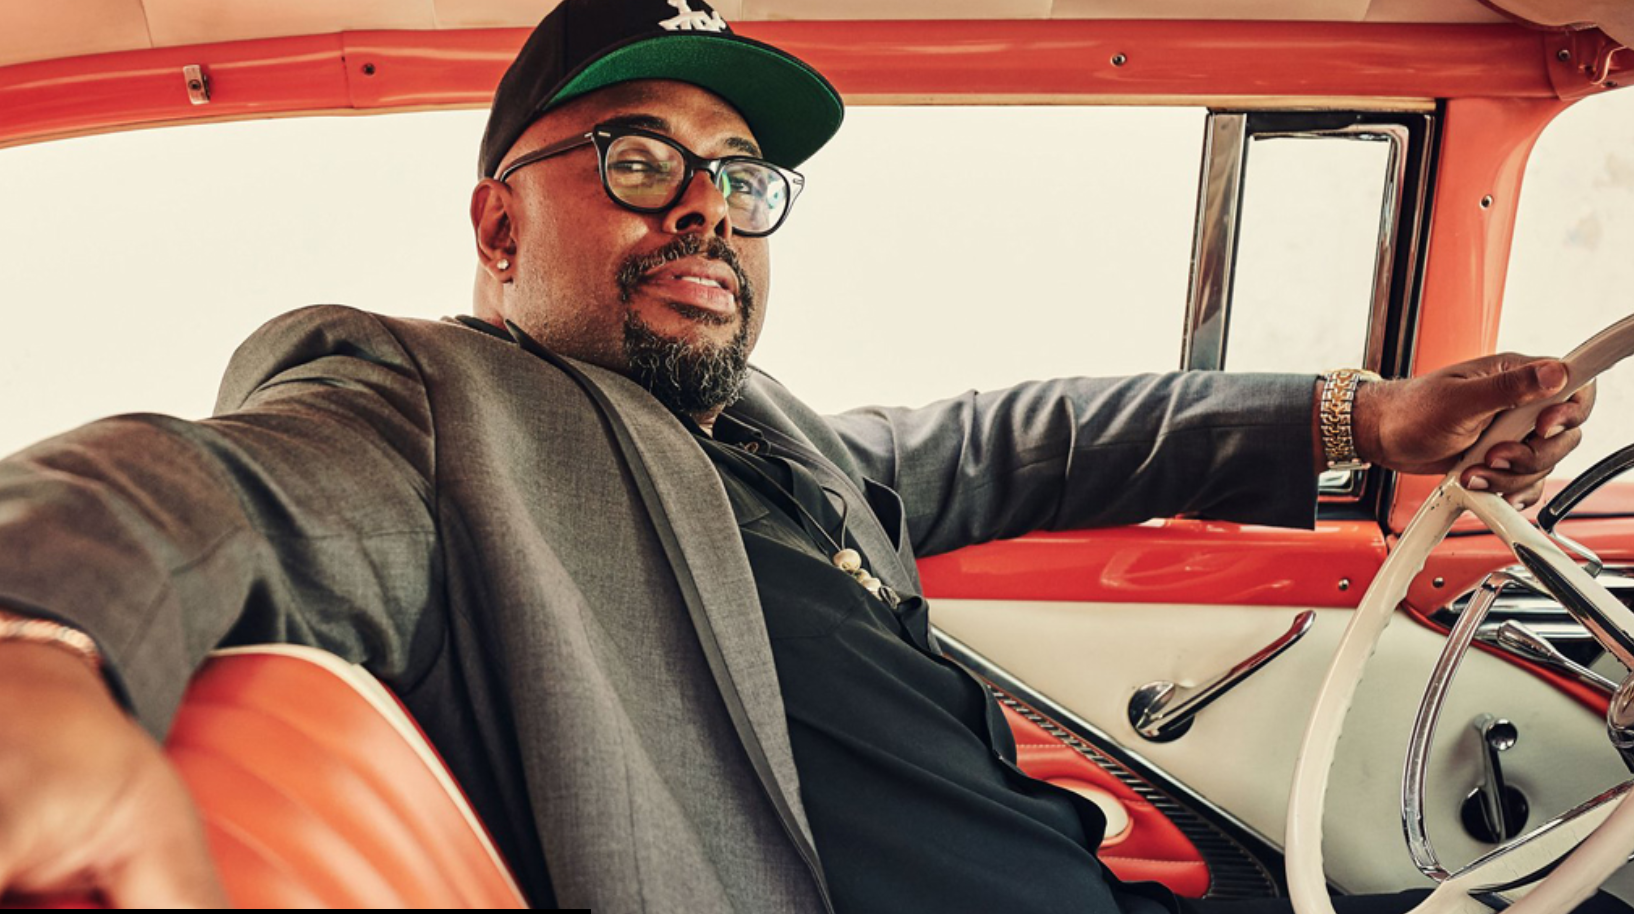 Christian McBride, a Black man in a suit jacket and a baseball cap, is seated in the driverâ€™s seat of a mid-century car. He looks to his right, toward the camera. His left hand is on the steering wheel and his right hand is slung along the back of the car seat. Screenshot from the KCPA website.